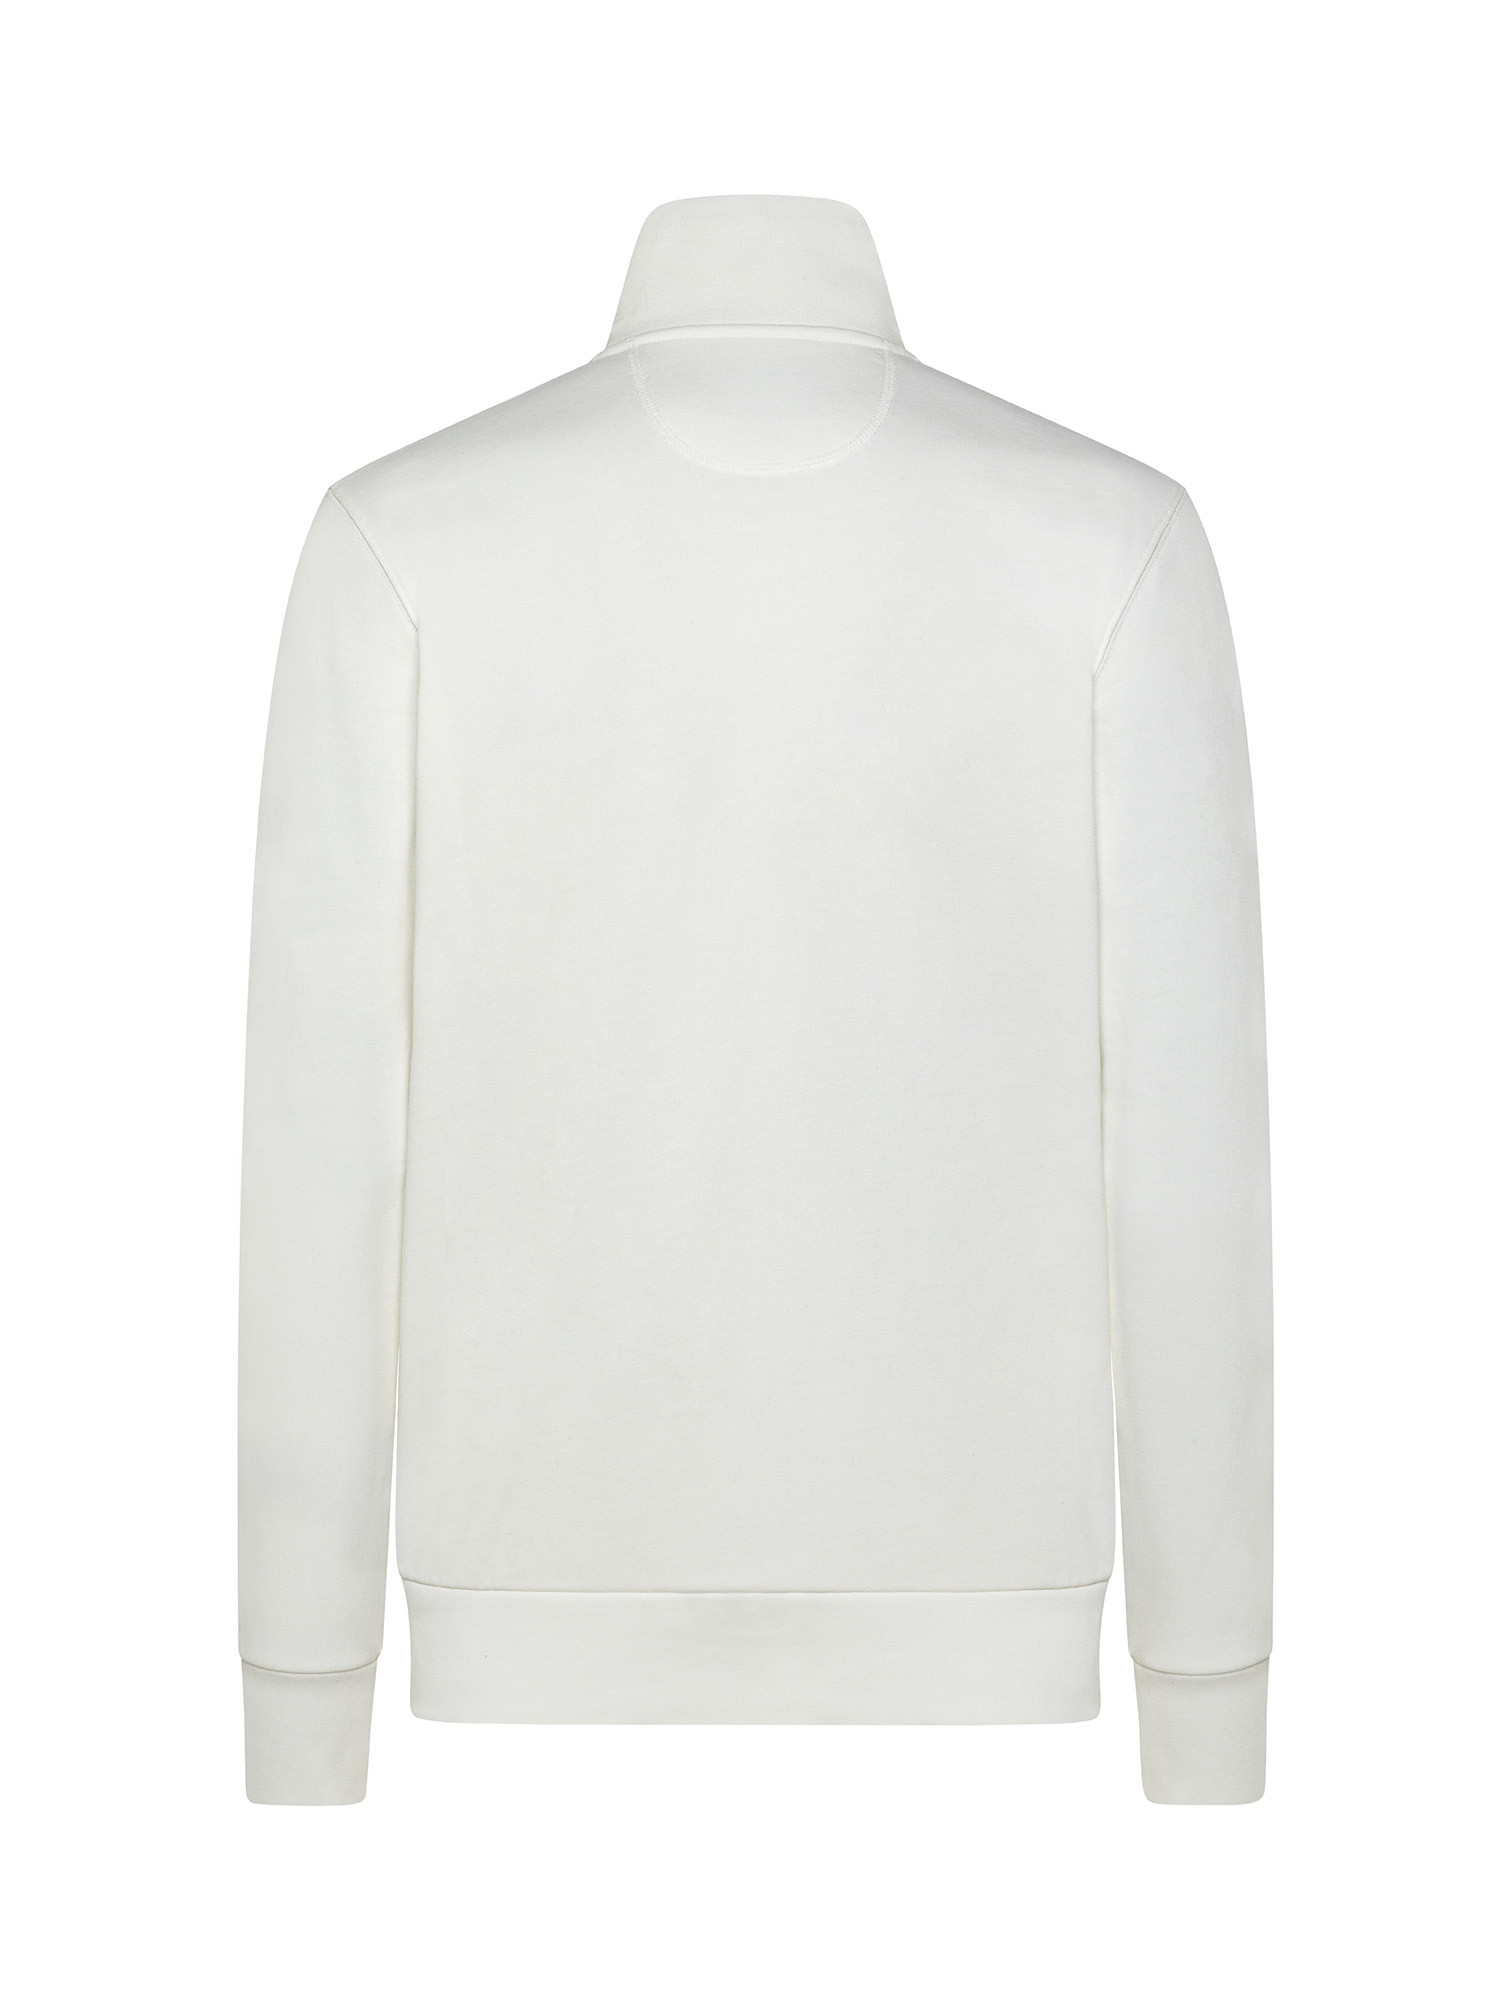 Long-sleeved sweatshirt in pure cotton comfort fit, Off White, large image number 1